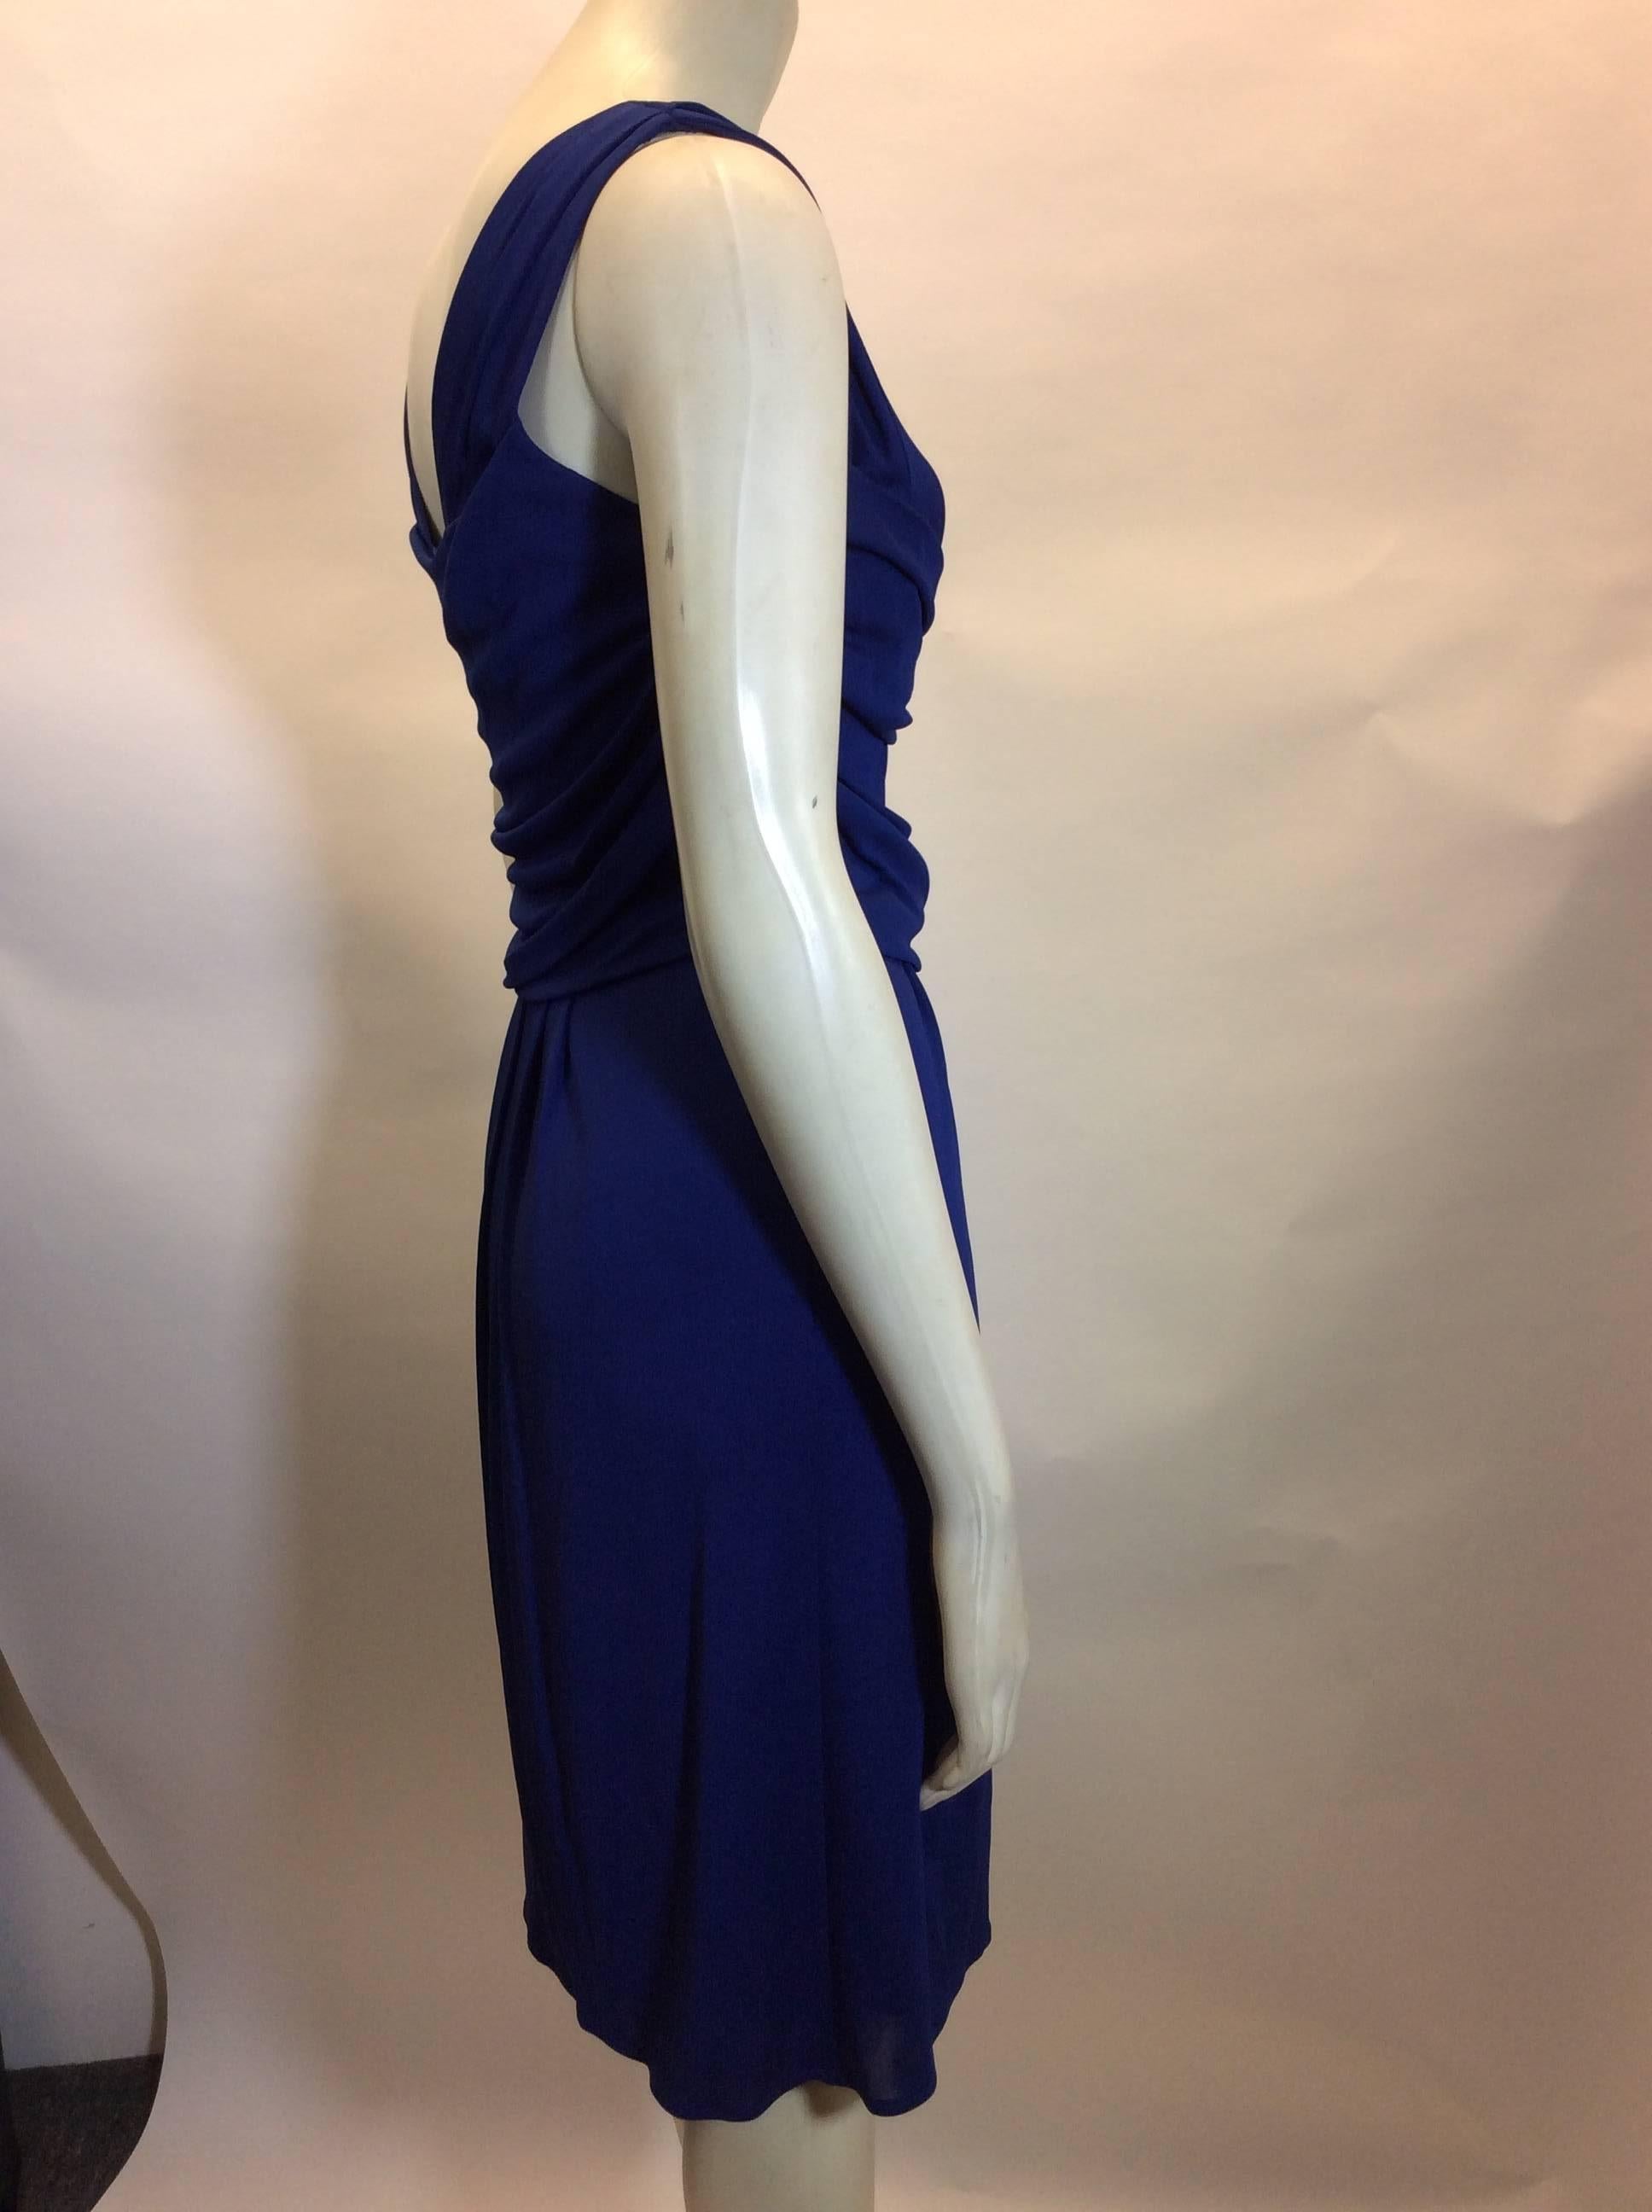 Moschino Sleeveless Royal Blue Dress
$399
Size 10
100% rayon 
Fully lined 
Made in Italy
Size 10
